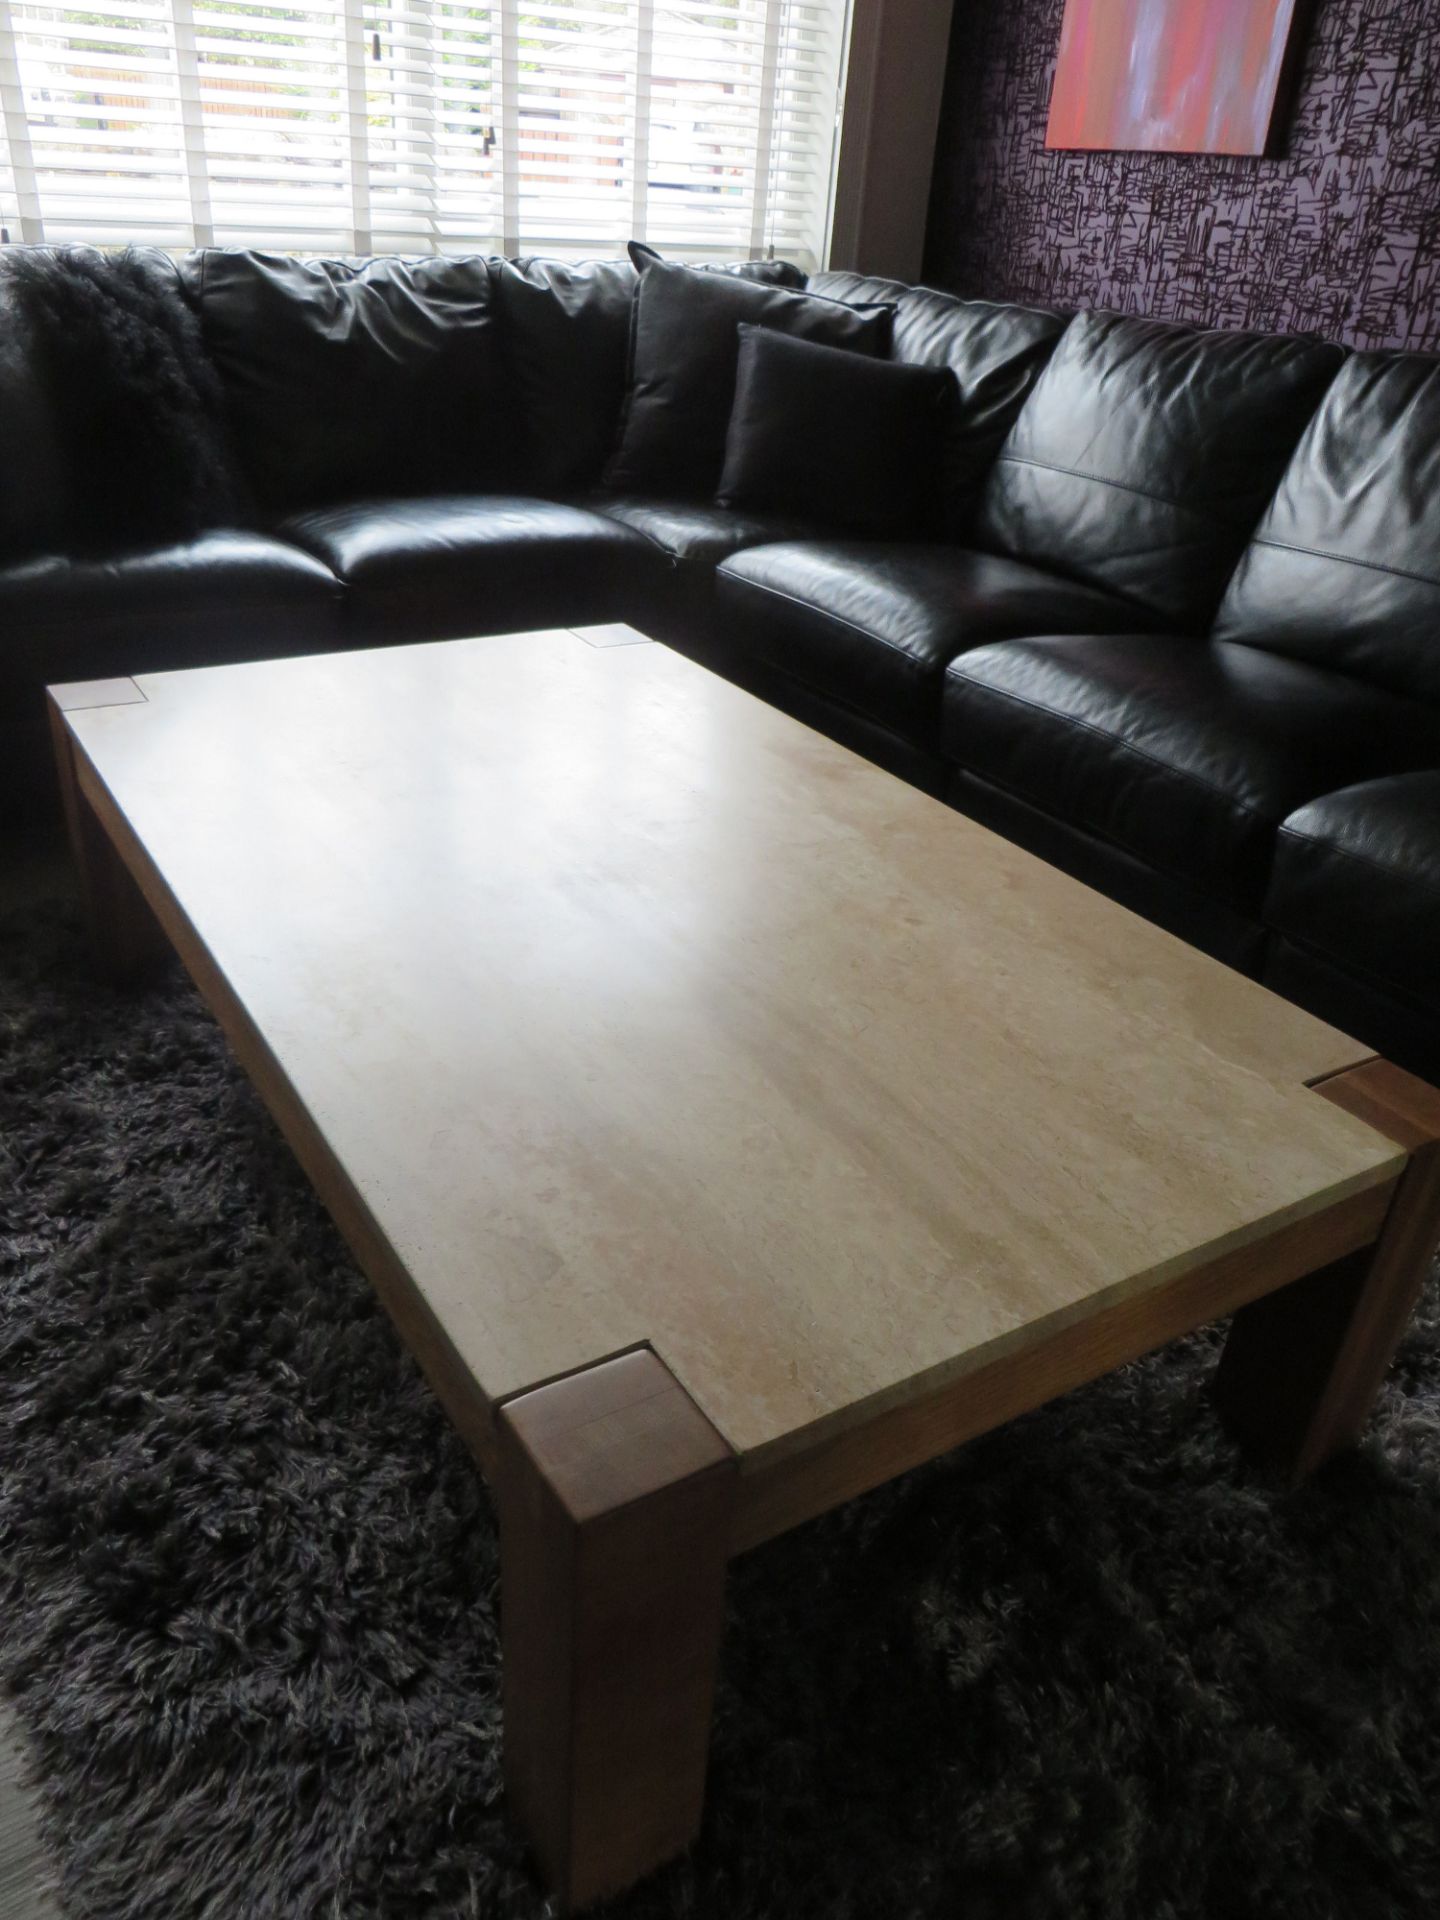 1 x Contemporary Oak and Travertine Coffee Table - CL175 - Location: Bradshaw BL2 - NO VAT - Image 3 of 9